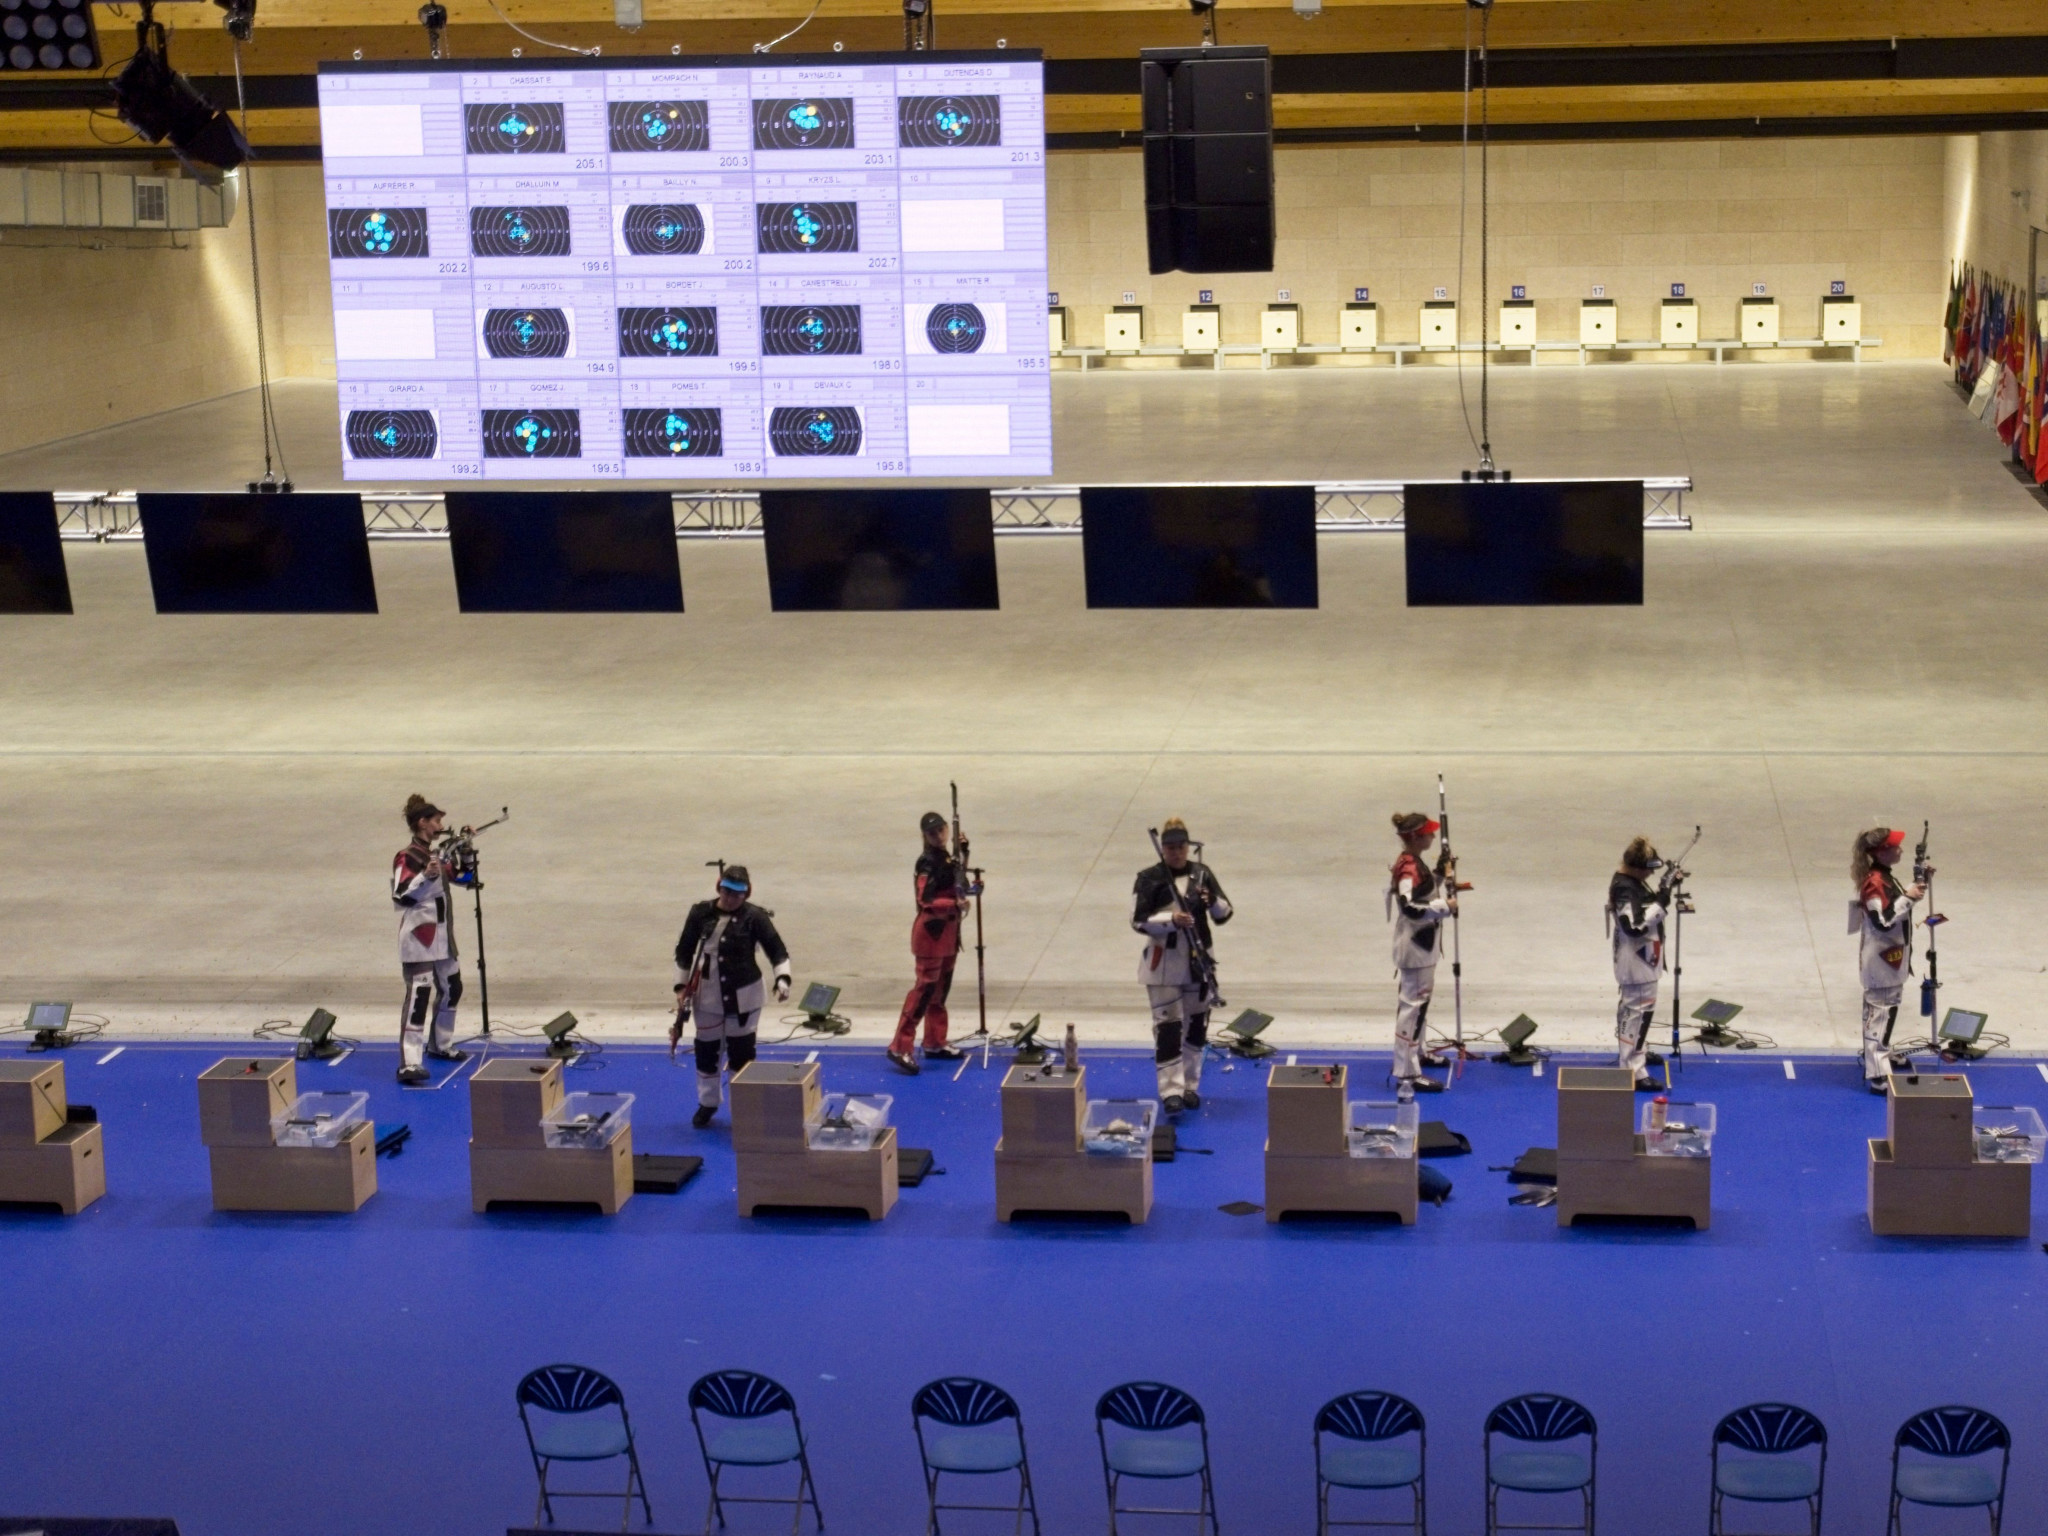 Paris 2024 President Tony Estanguet described the National Shooting Centre in Châteauroux as "very impressive" ©Getty Images